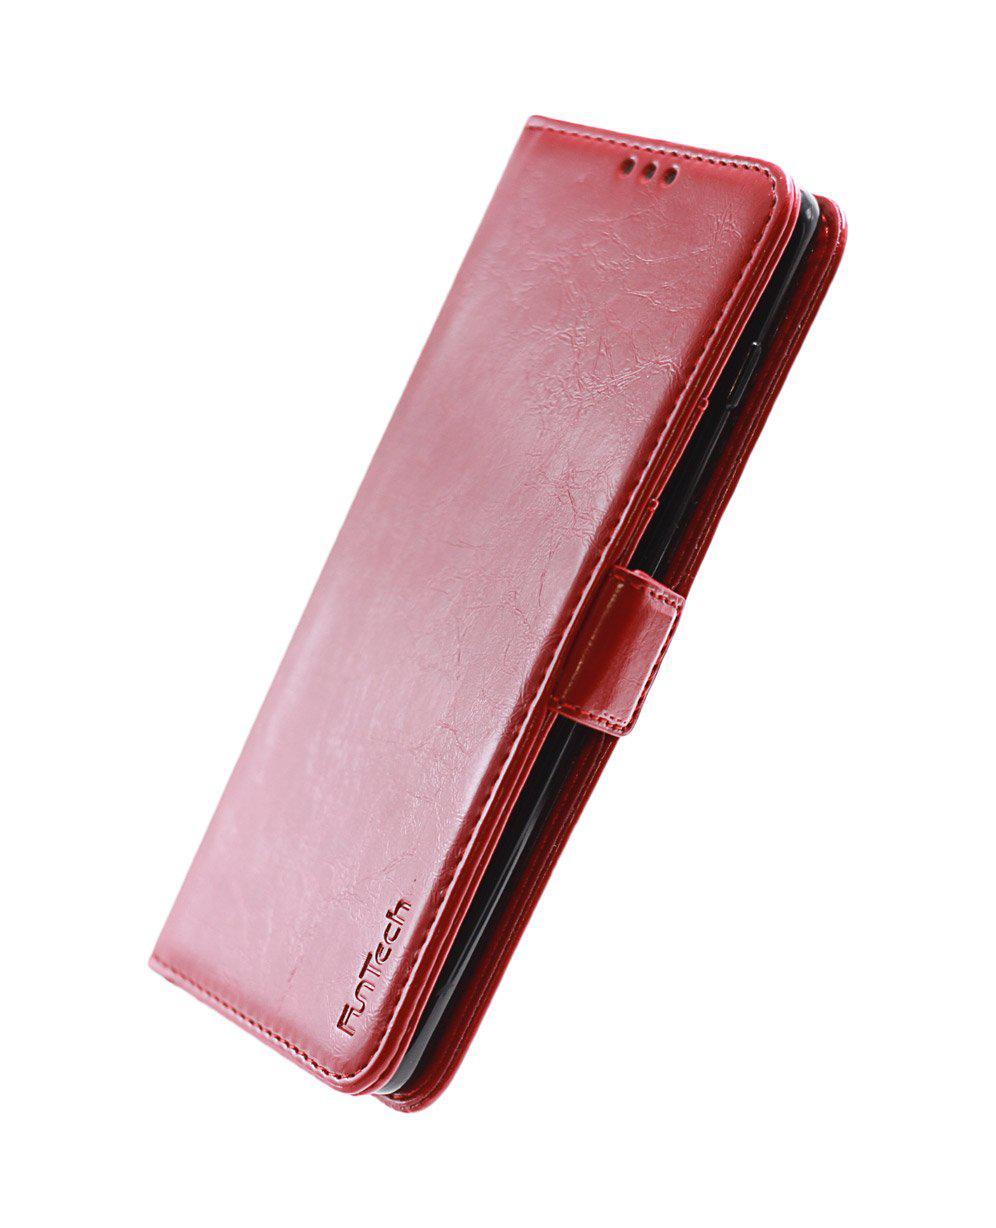 Samsung S10 Plus Leather Case Red